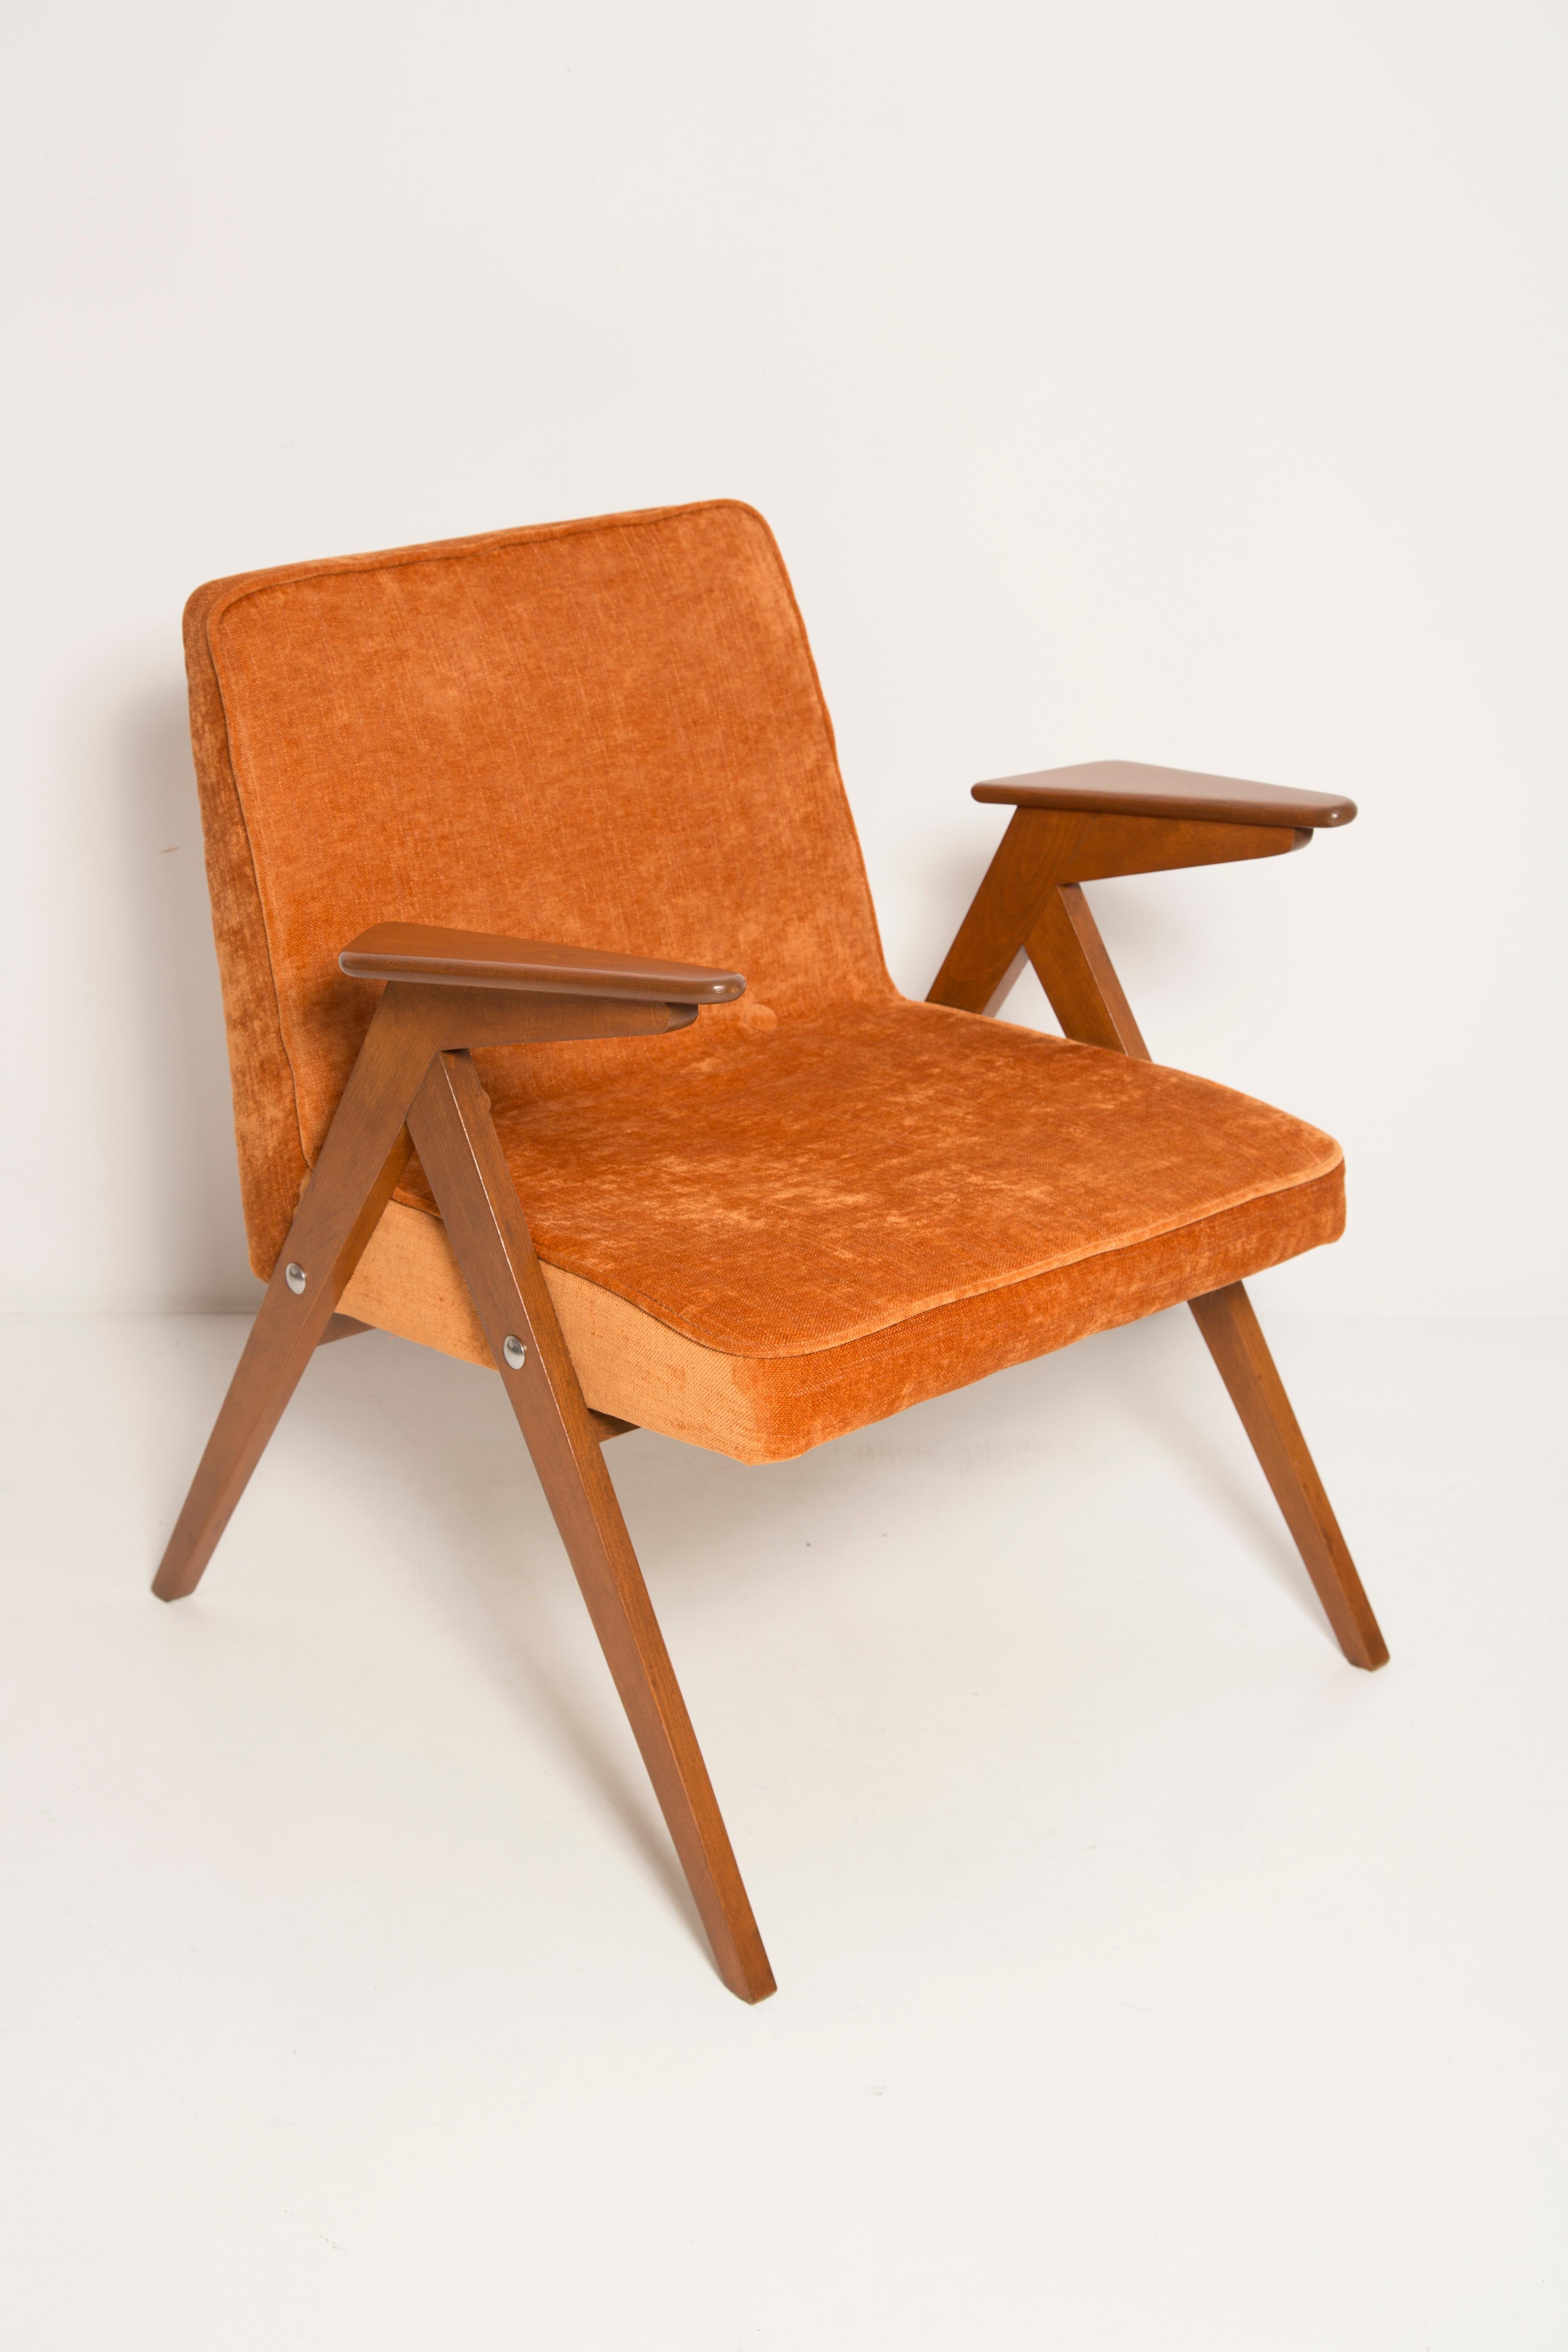 Hand-Crafted Midcentury Orange Bunny Armchair, by Jozef Chierowski, Poland, 1960s For Sale